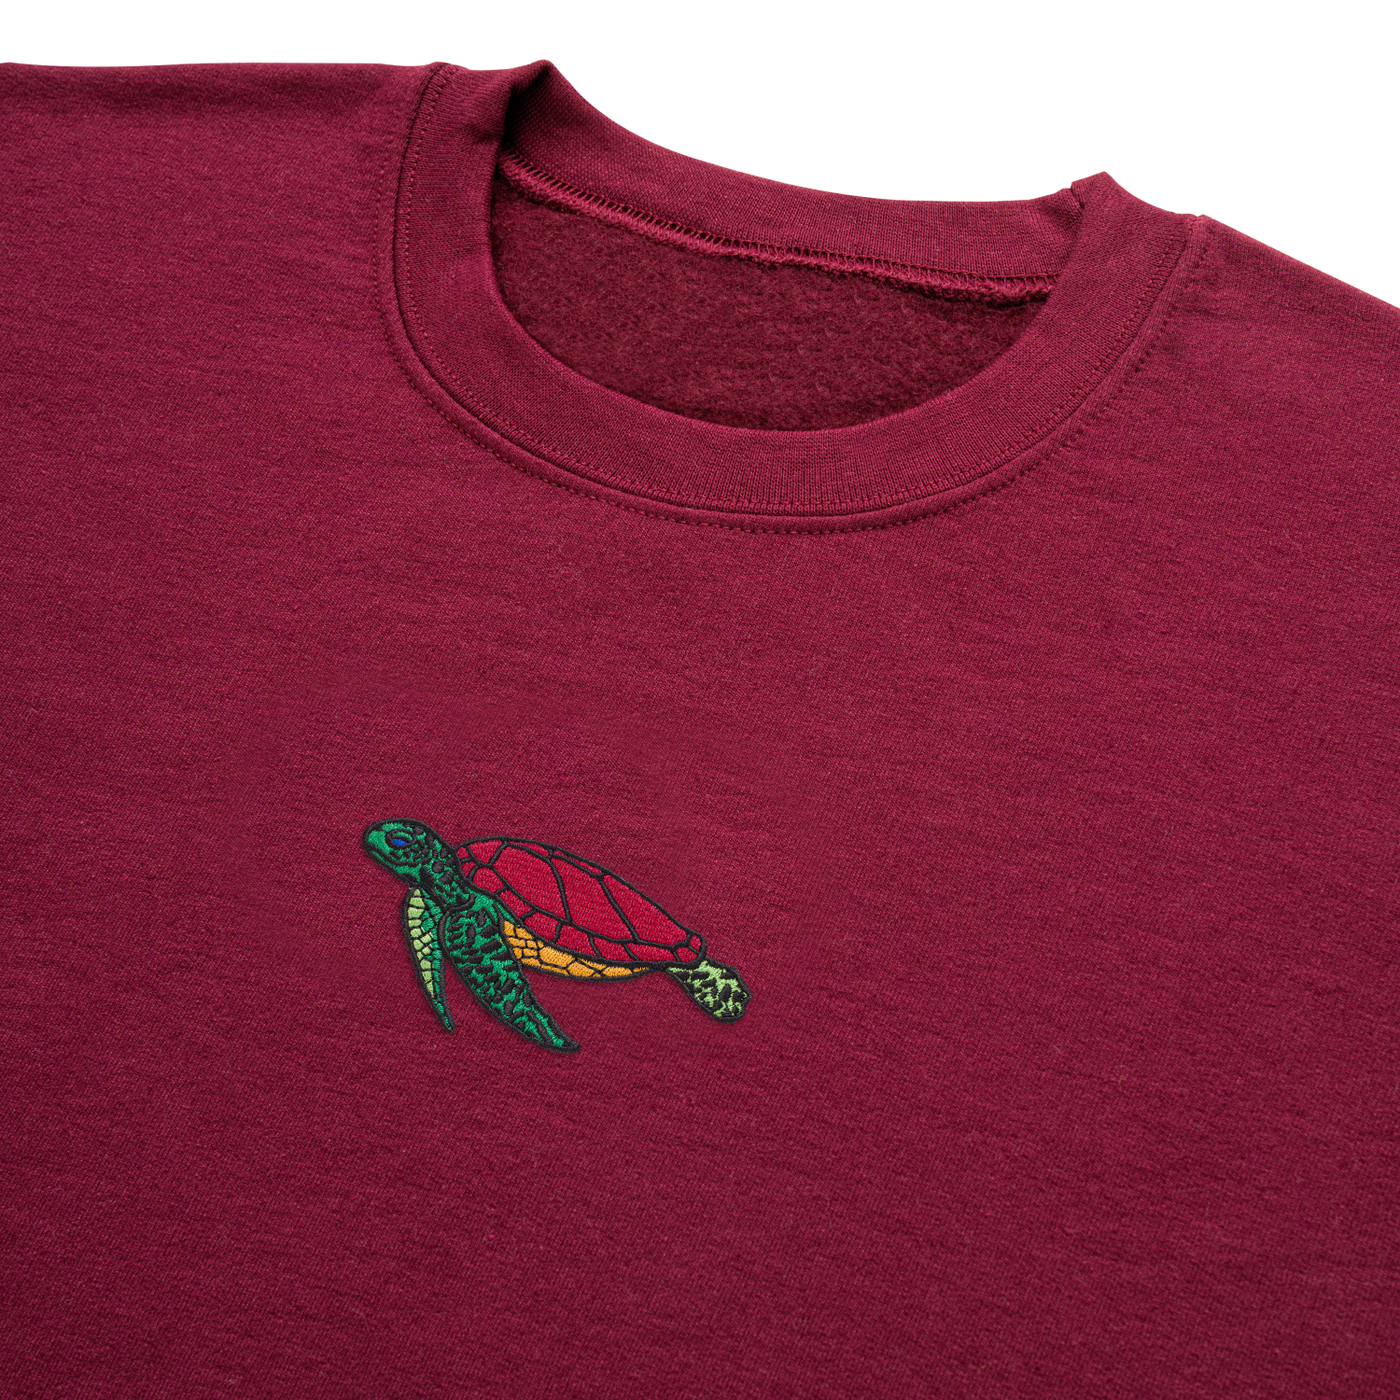 Bobby's Planet Men's Embroidered Sea Turtle Sweatshirt from Seven Seas Fish Animals Collection in Maroon Color#color_maroon